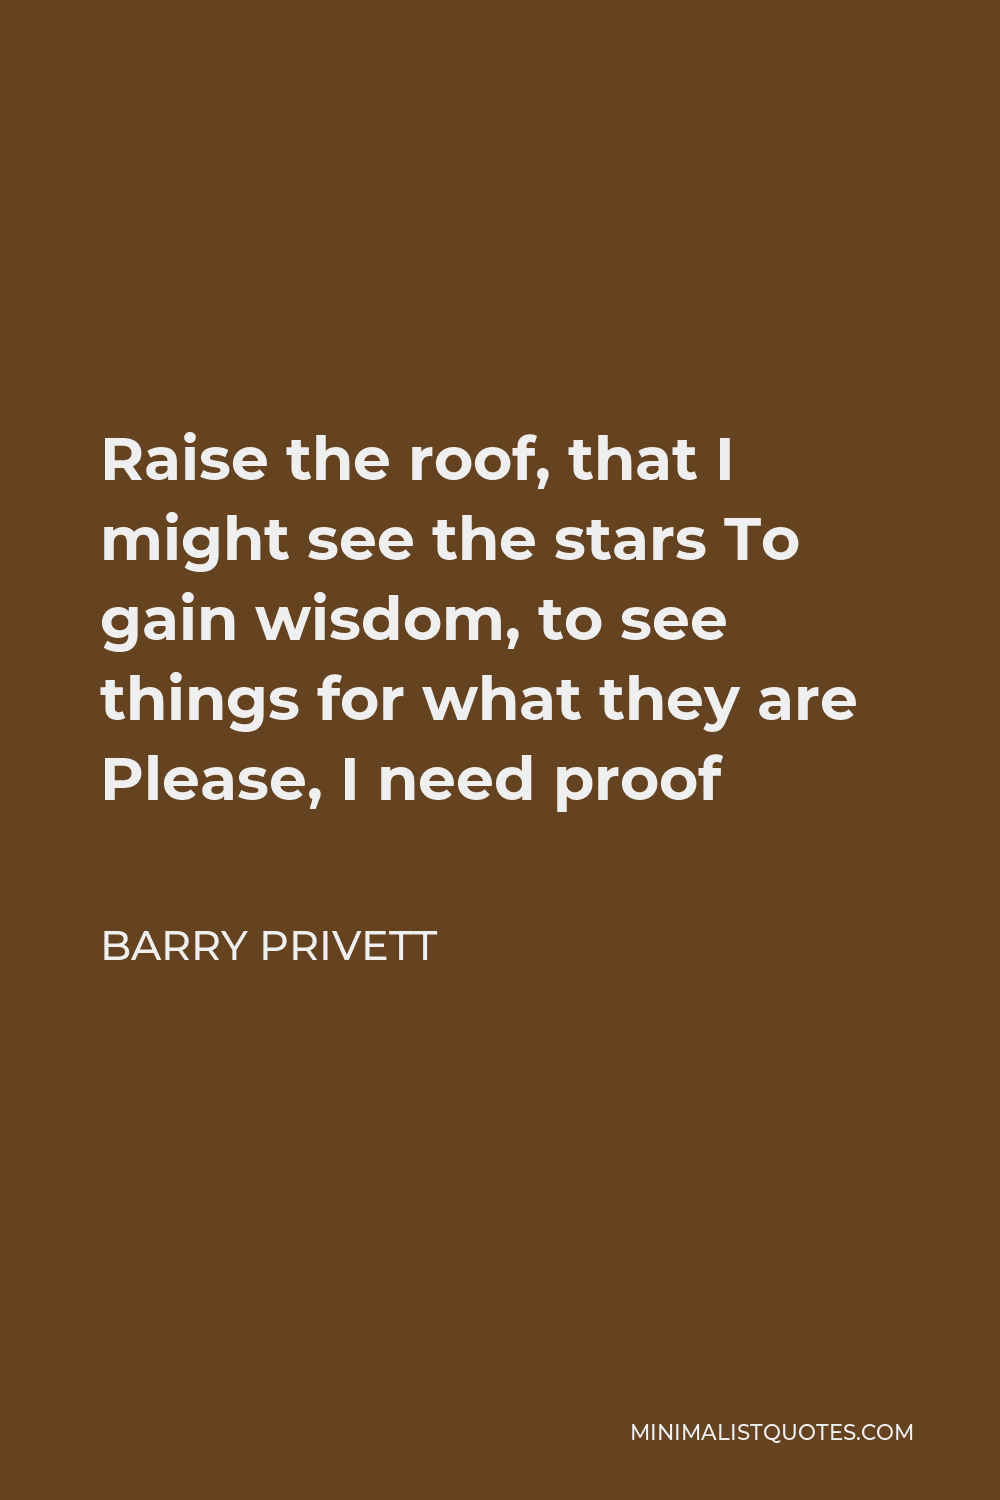 Barry Privett Quote - Raise the roof, that I might see the stars To gain wisdom, to see things for what they are Please, I need proof